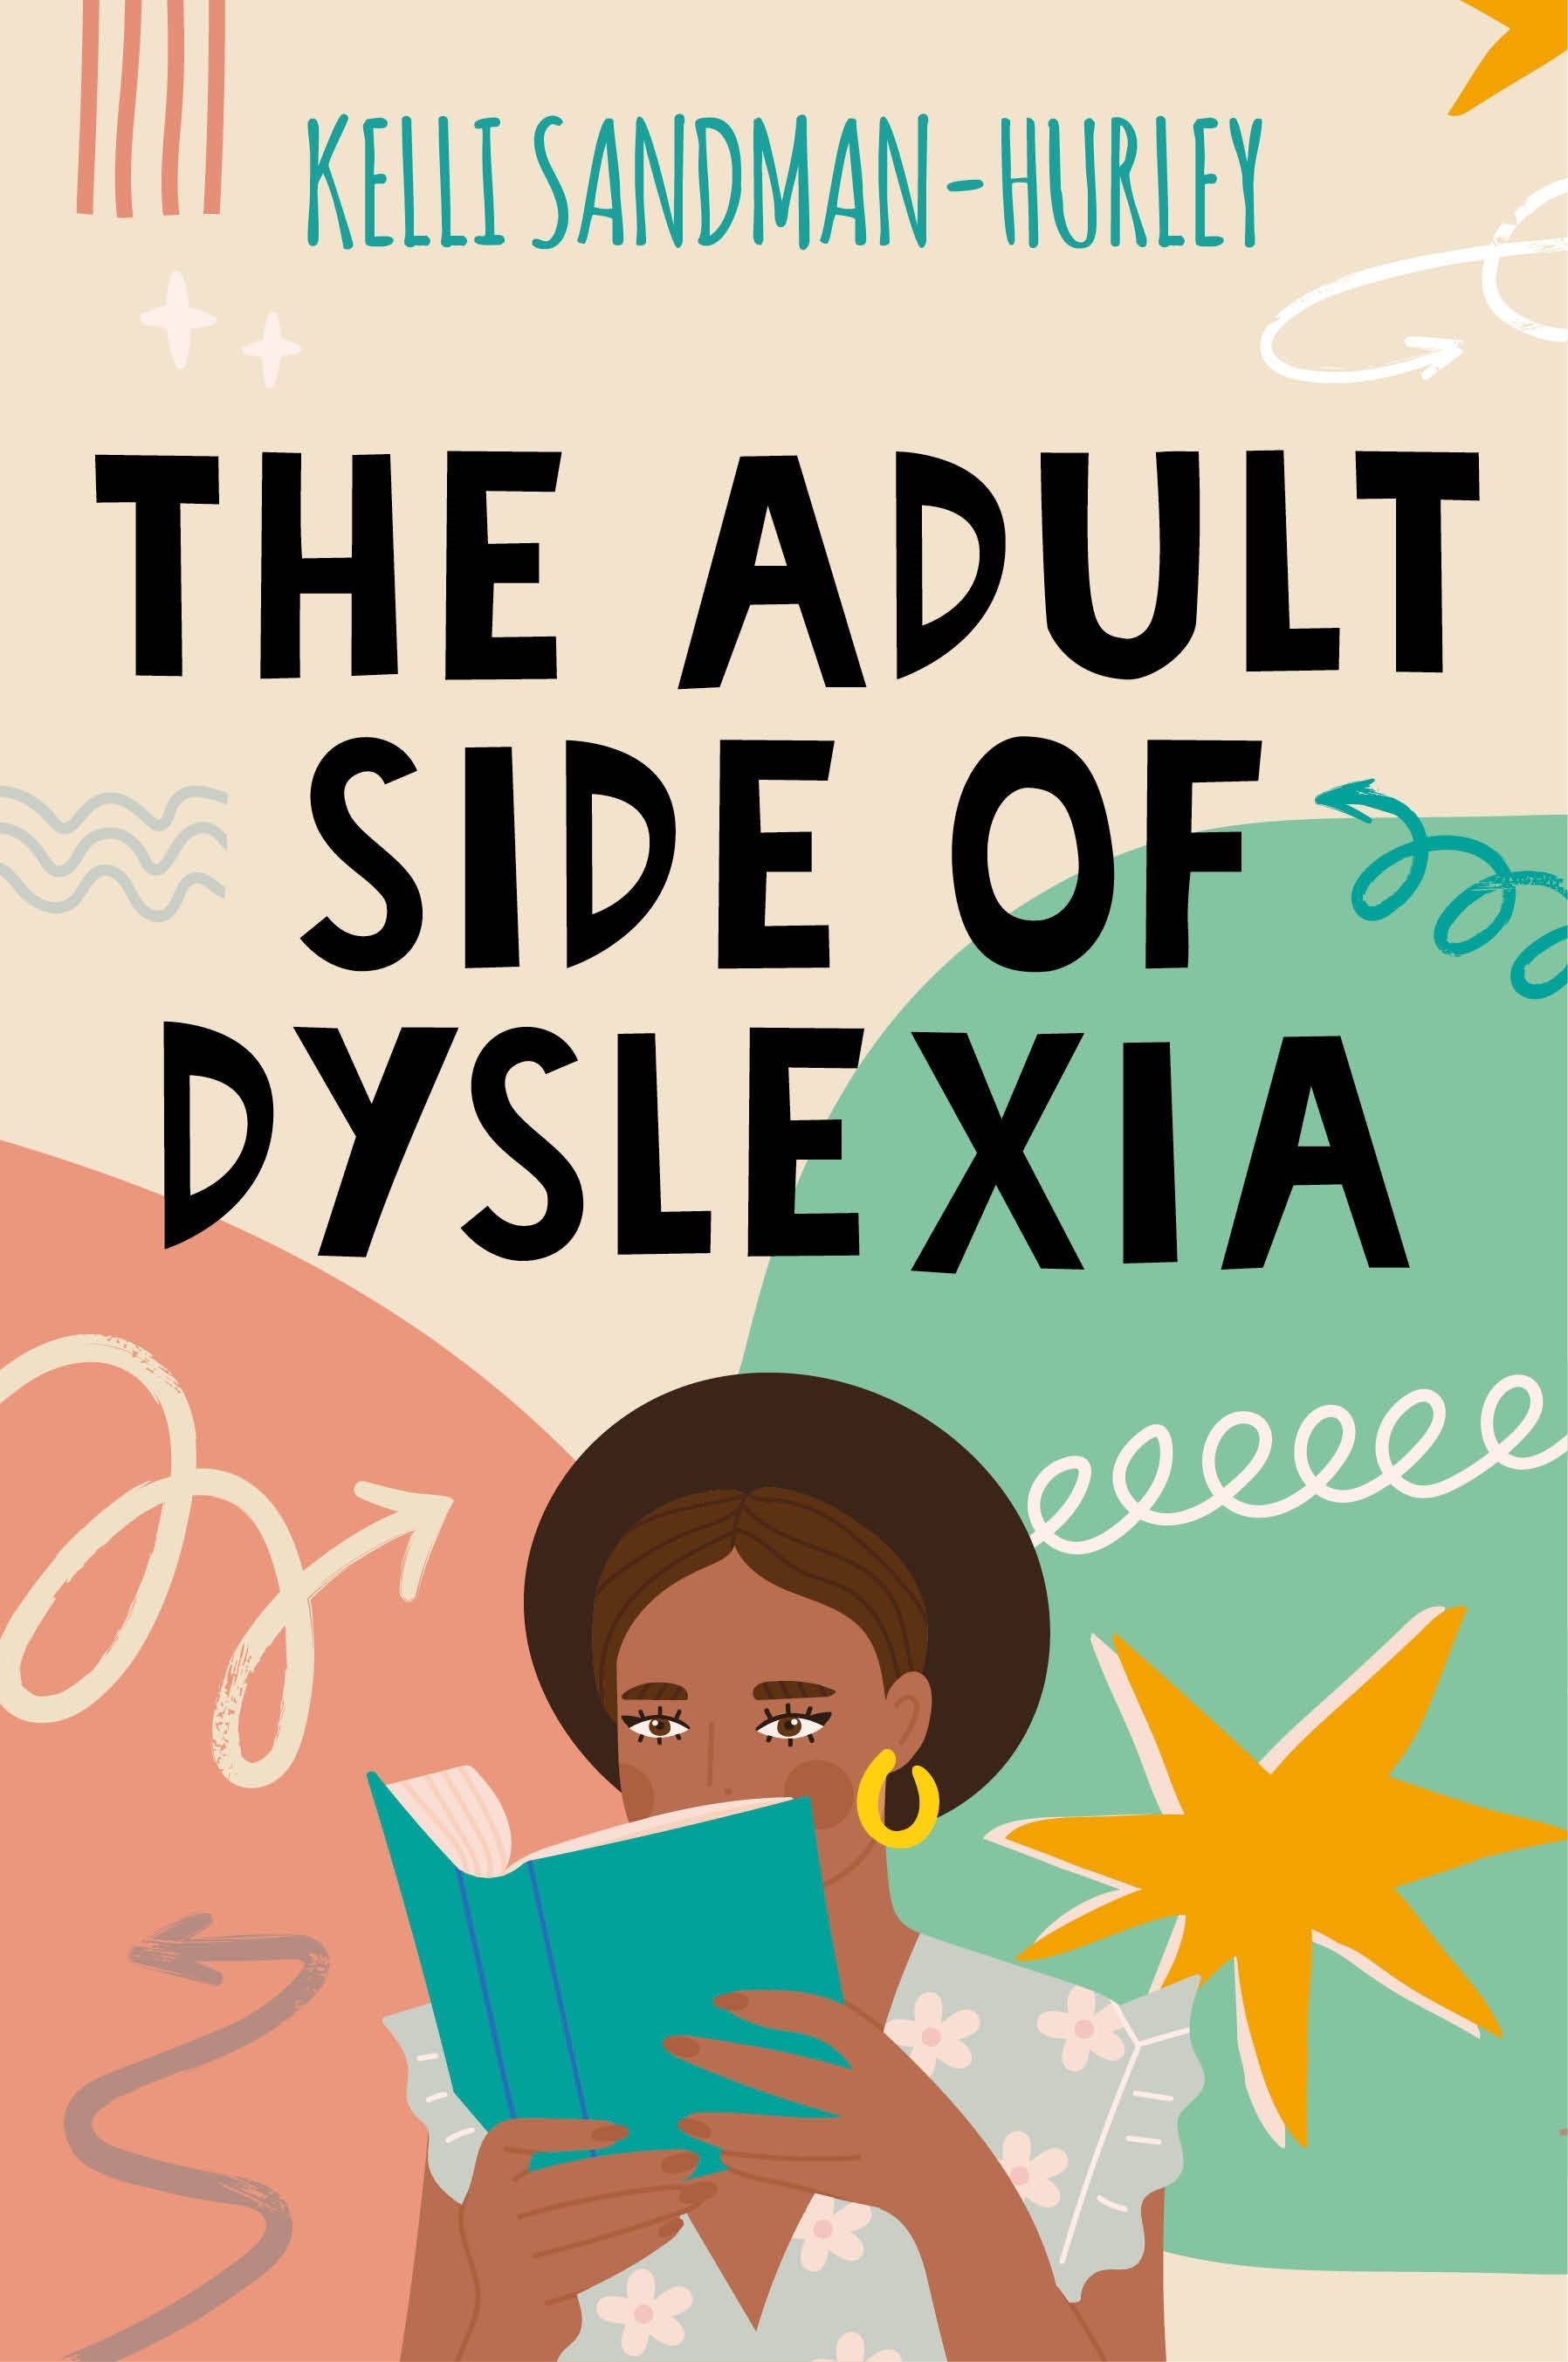 The Adult Side of Dyslexia by Kelli Sandman-Hurley